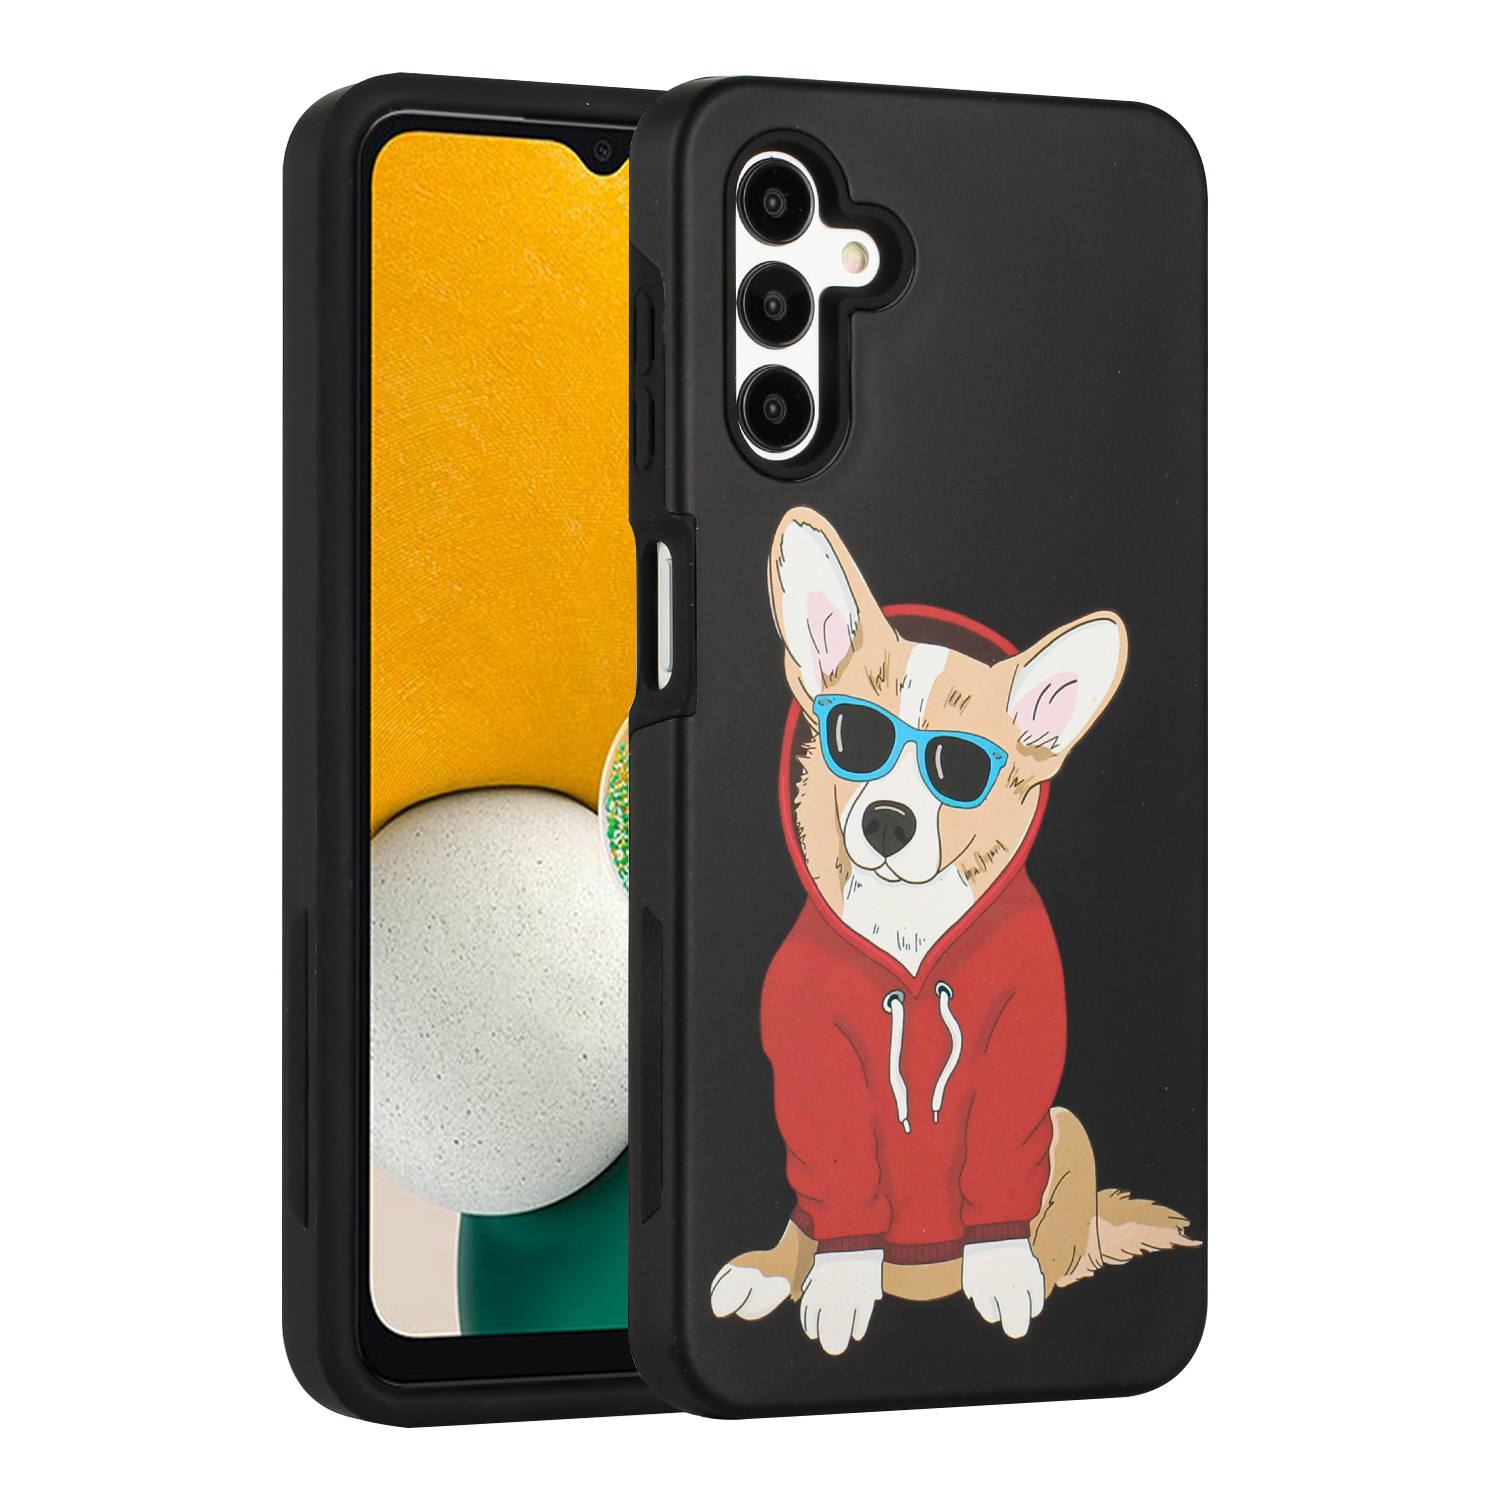 Glossy Design Dual Layer Armor Case Cover for Galaxy A13 5G (DOG)